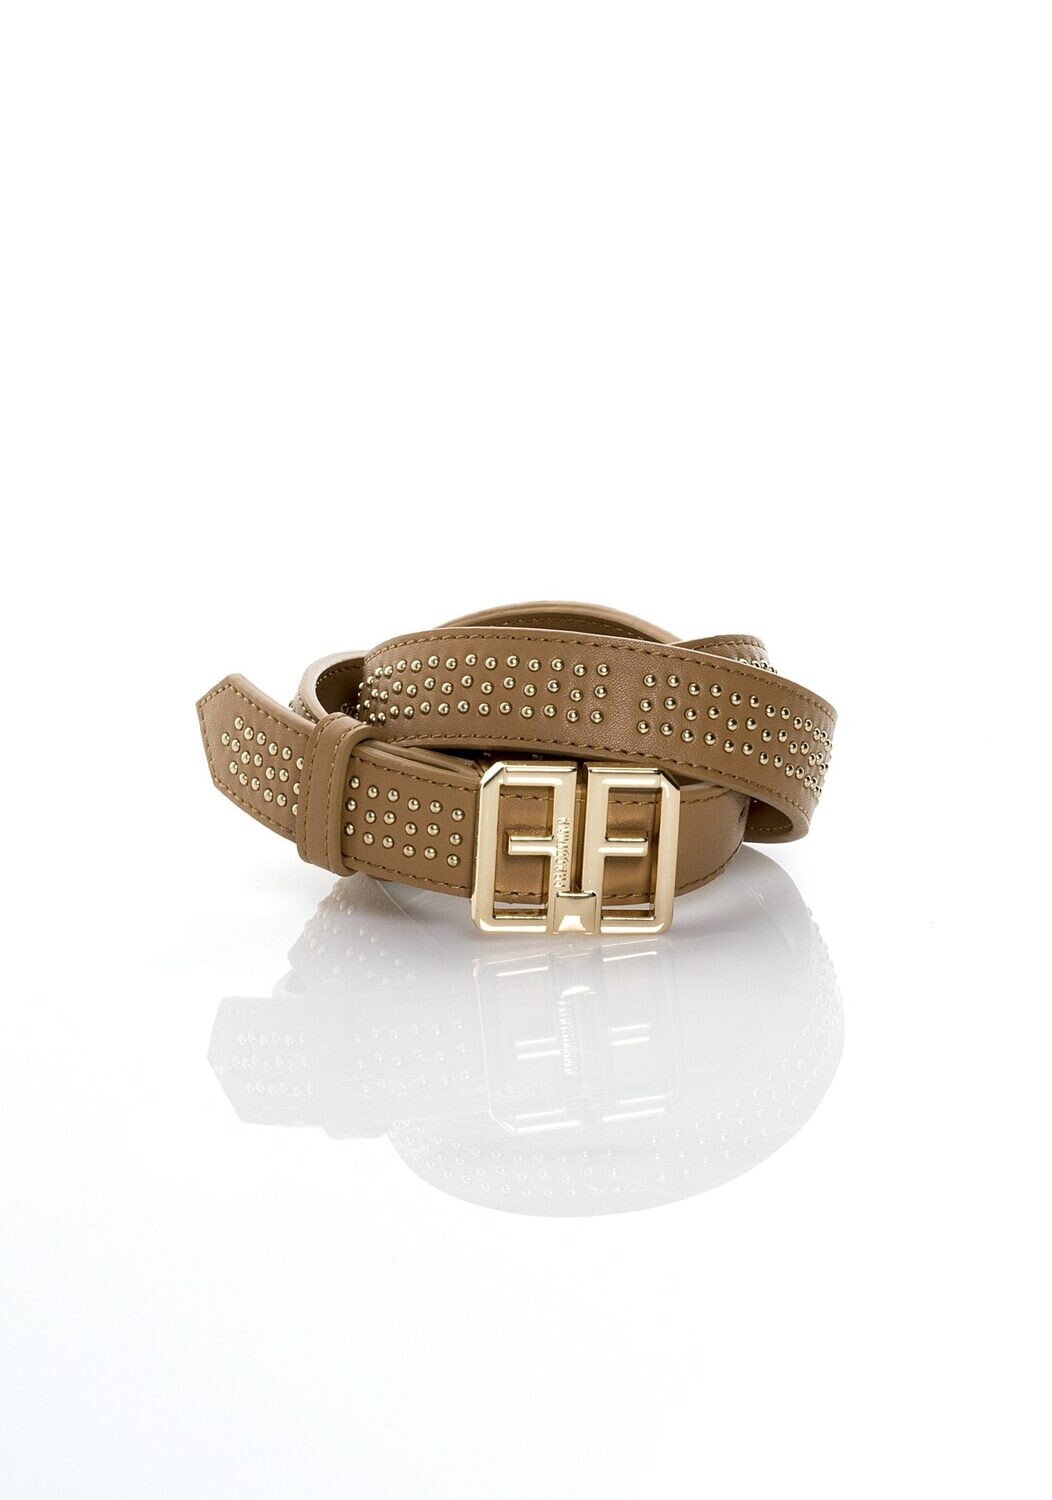 Women's faux leather belt with studs